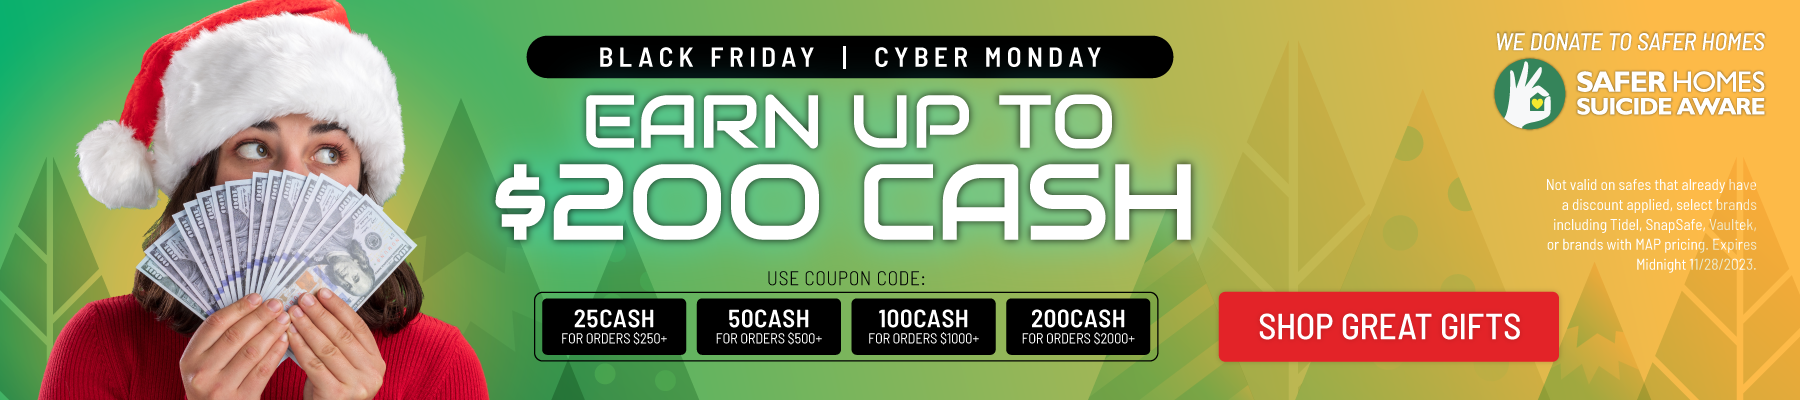 Black Friday Cyber Monday - Earn up to $200 Cash